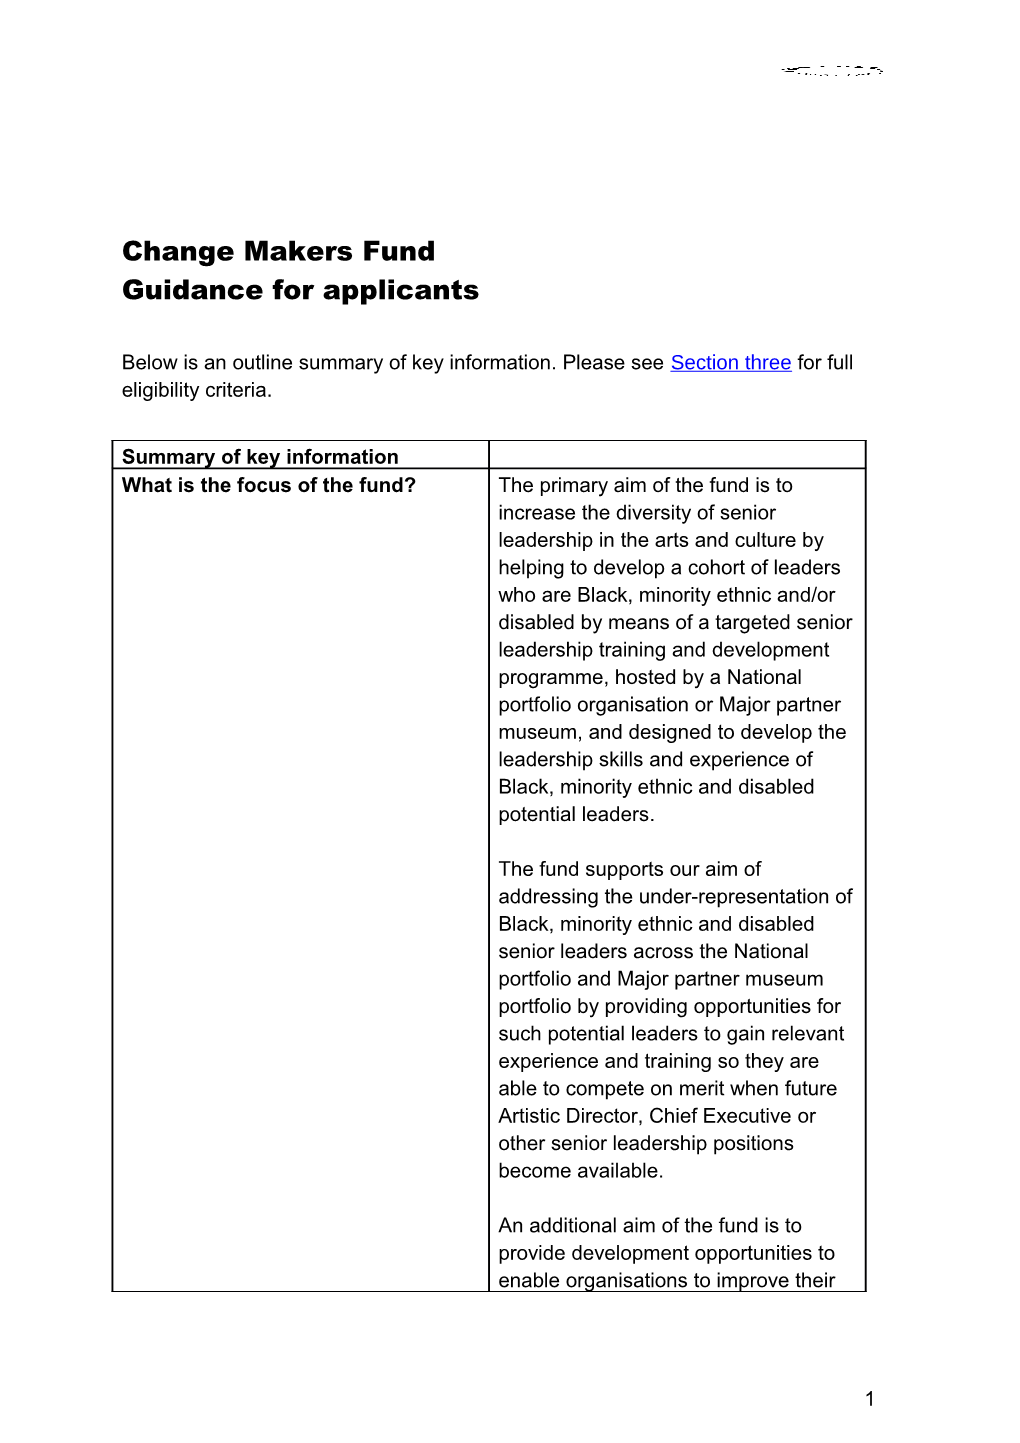 Change Makers Fund Guidance for Applicants